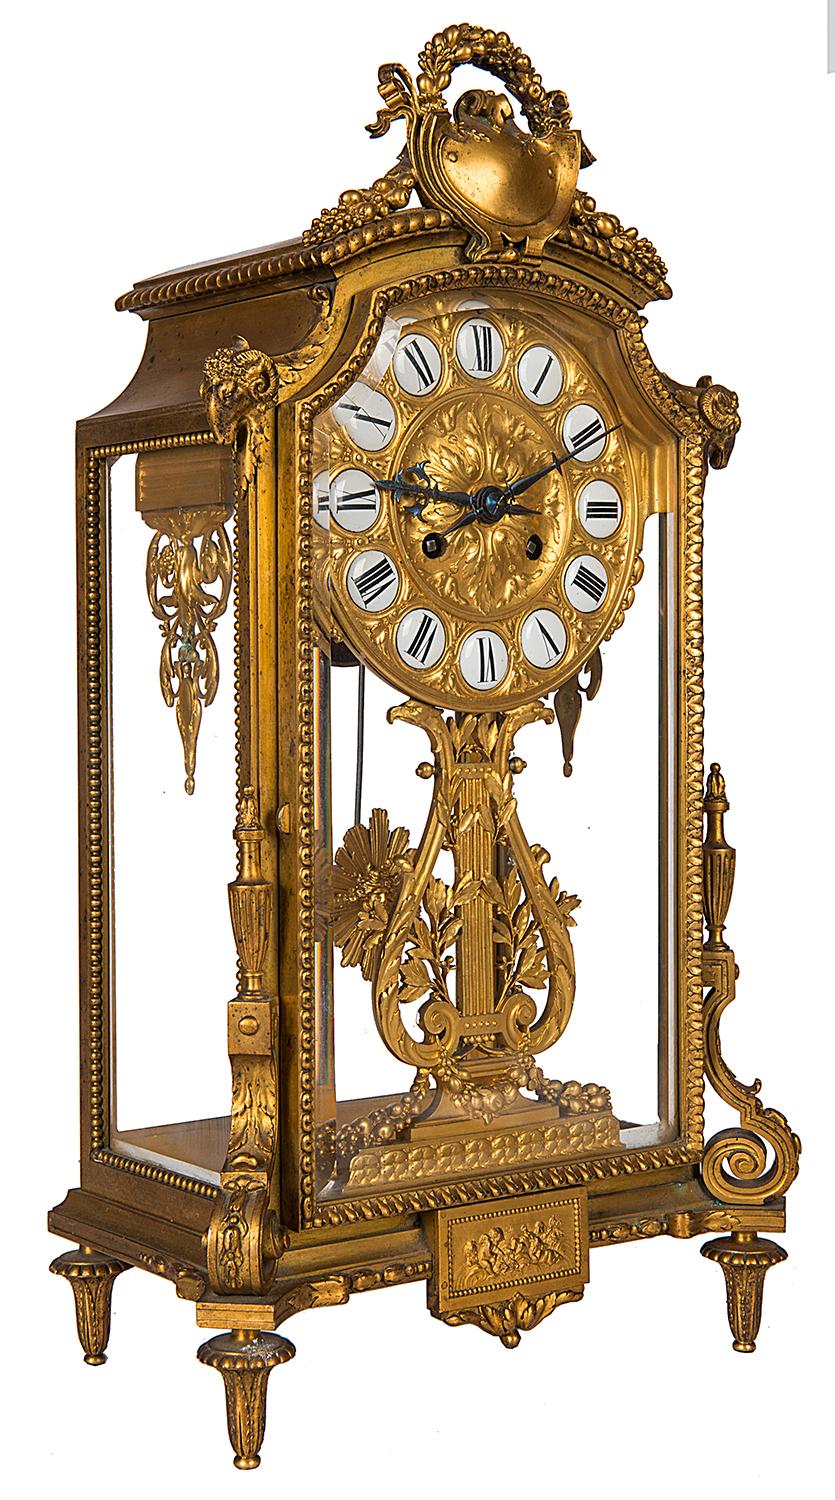 A fine quality Louis XVI style French gilded ormolu mantel clock, signed Barbedienne. Having shield and foliate decoration to the top, white enamel roman numerals, a lyre shaped pendulum, four glass sides, Rams head mounts and an ormolu plaque it